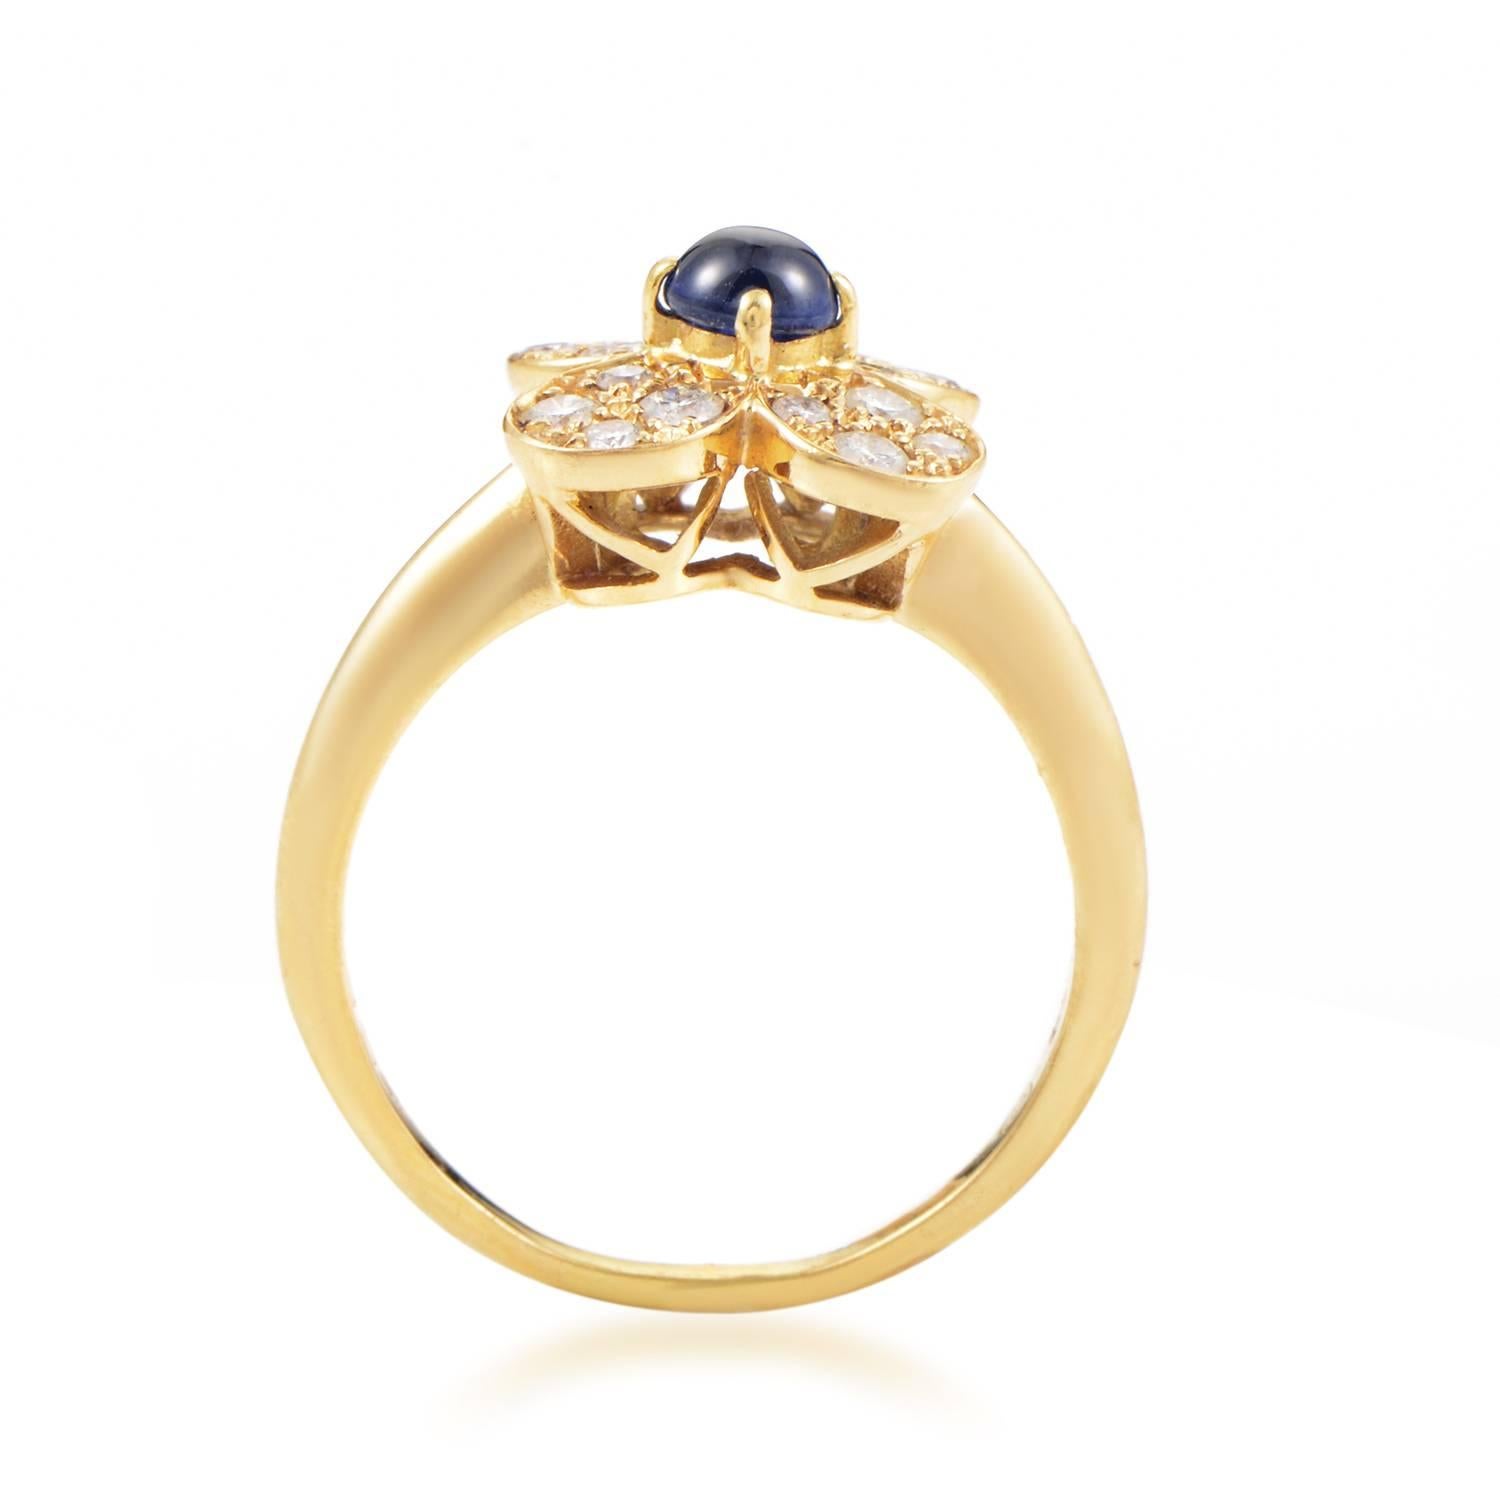 Showing their immense love for the beauty of nature as a constant stream of inspiration, Van Cleef & Arpels present this gorgeous ring with a flower motif, boasting radiant 18K yellow gold petals set with 0.46ct of glistening diamonds while a